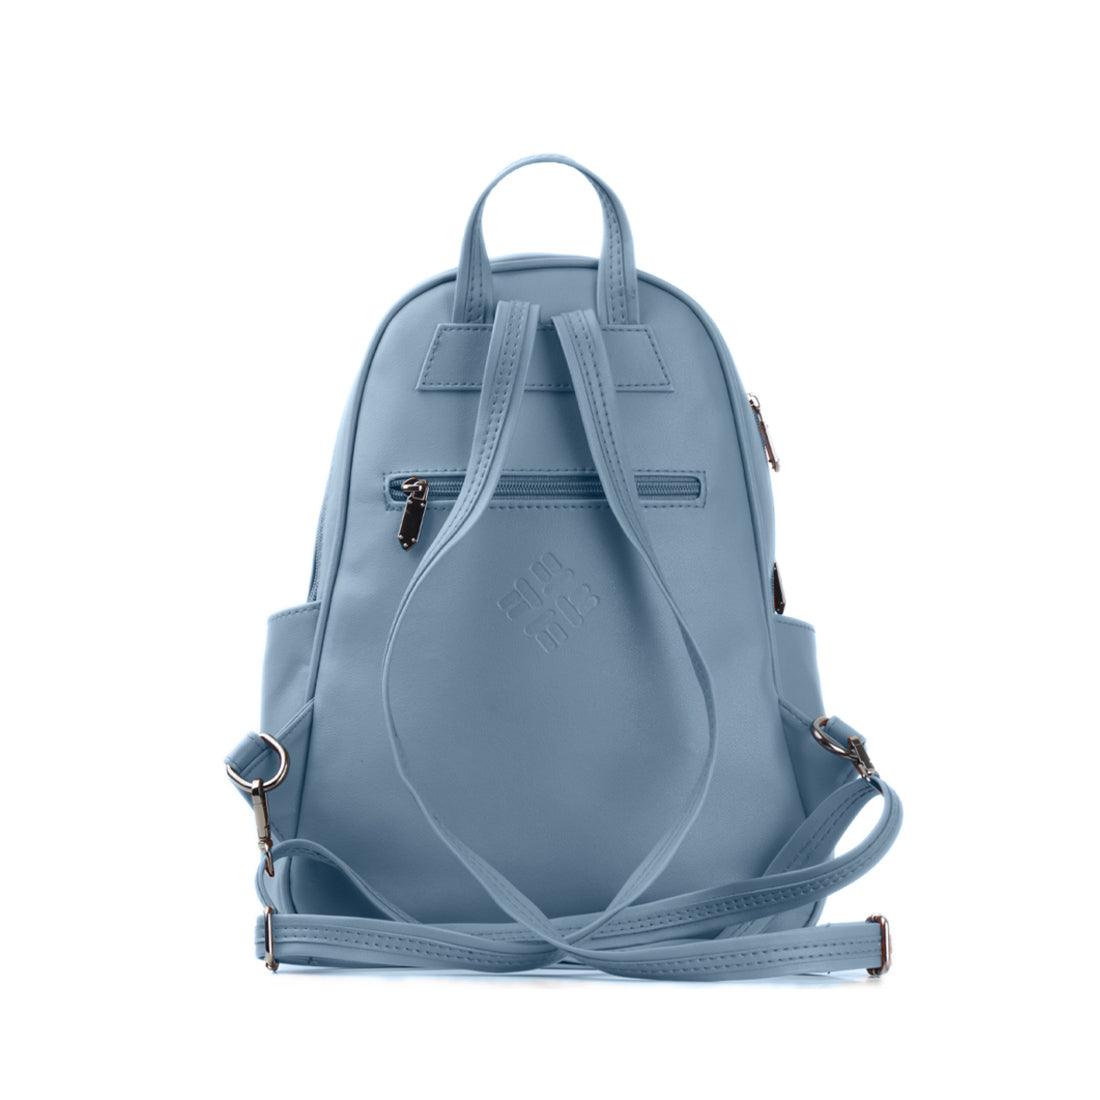 Blue Vivid Backpack Watercolor gentle - CANVAEGYPT